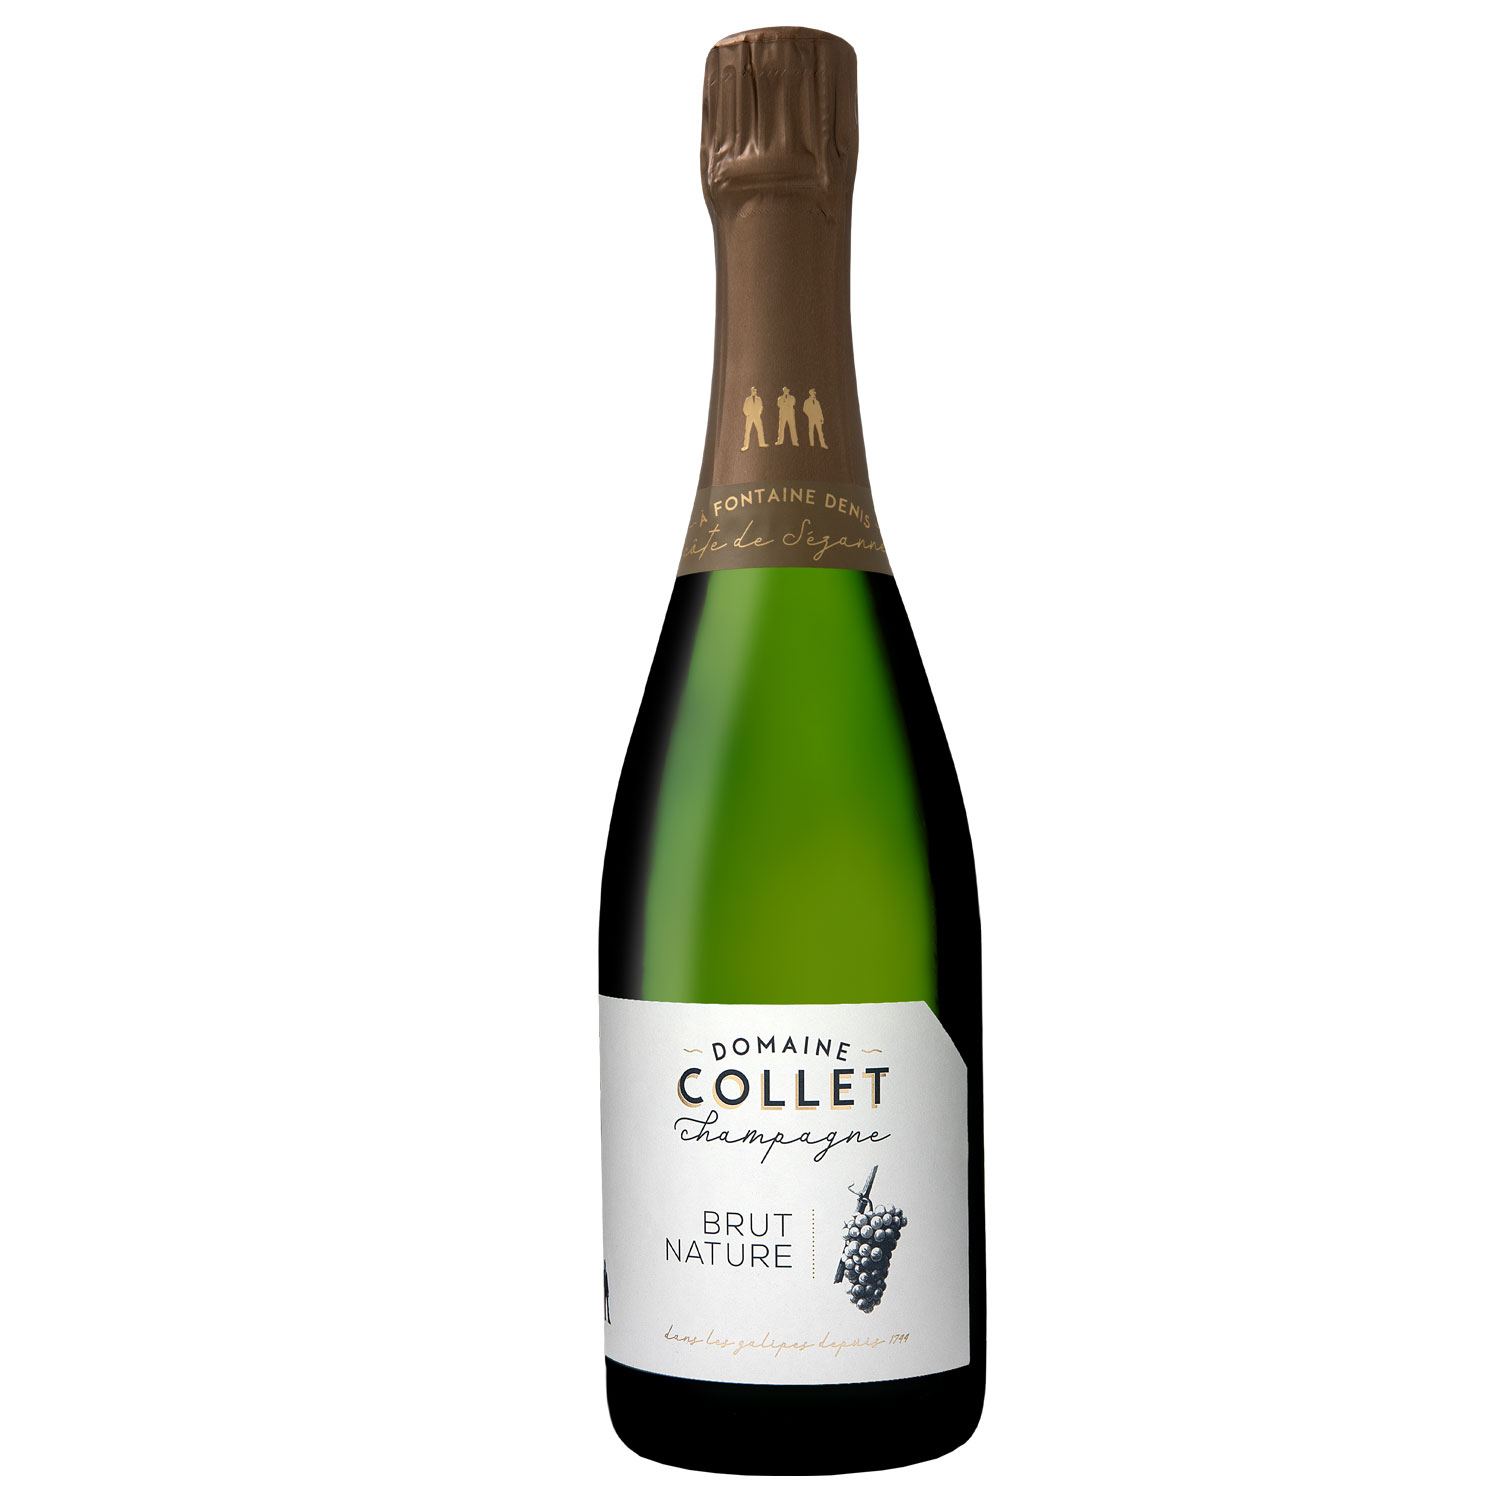 Domaine Collet Champagne: Brut Nature